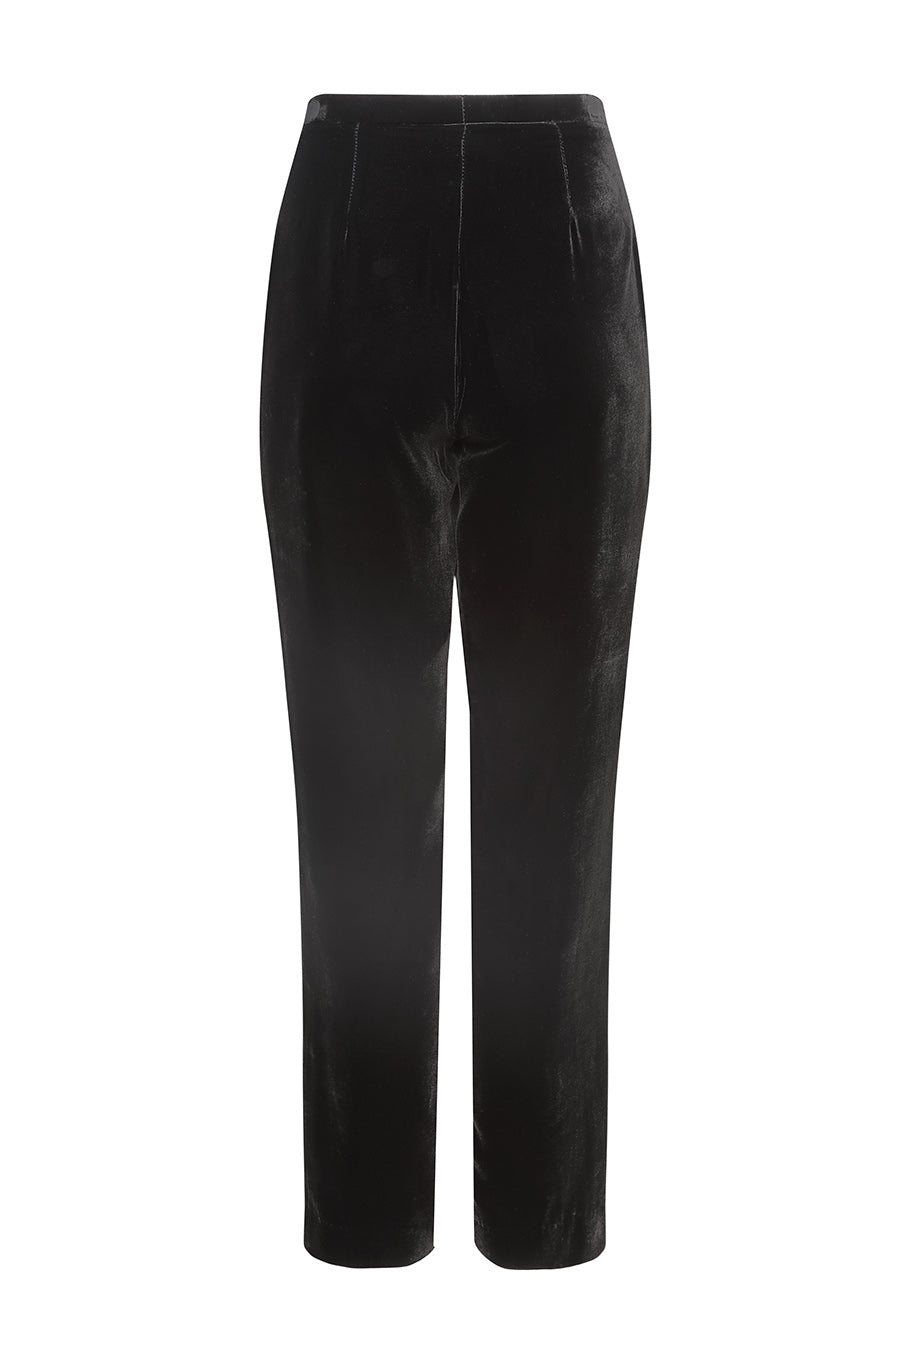 narrow black trousers for womens business outfit